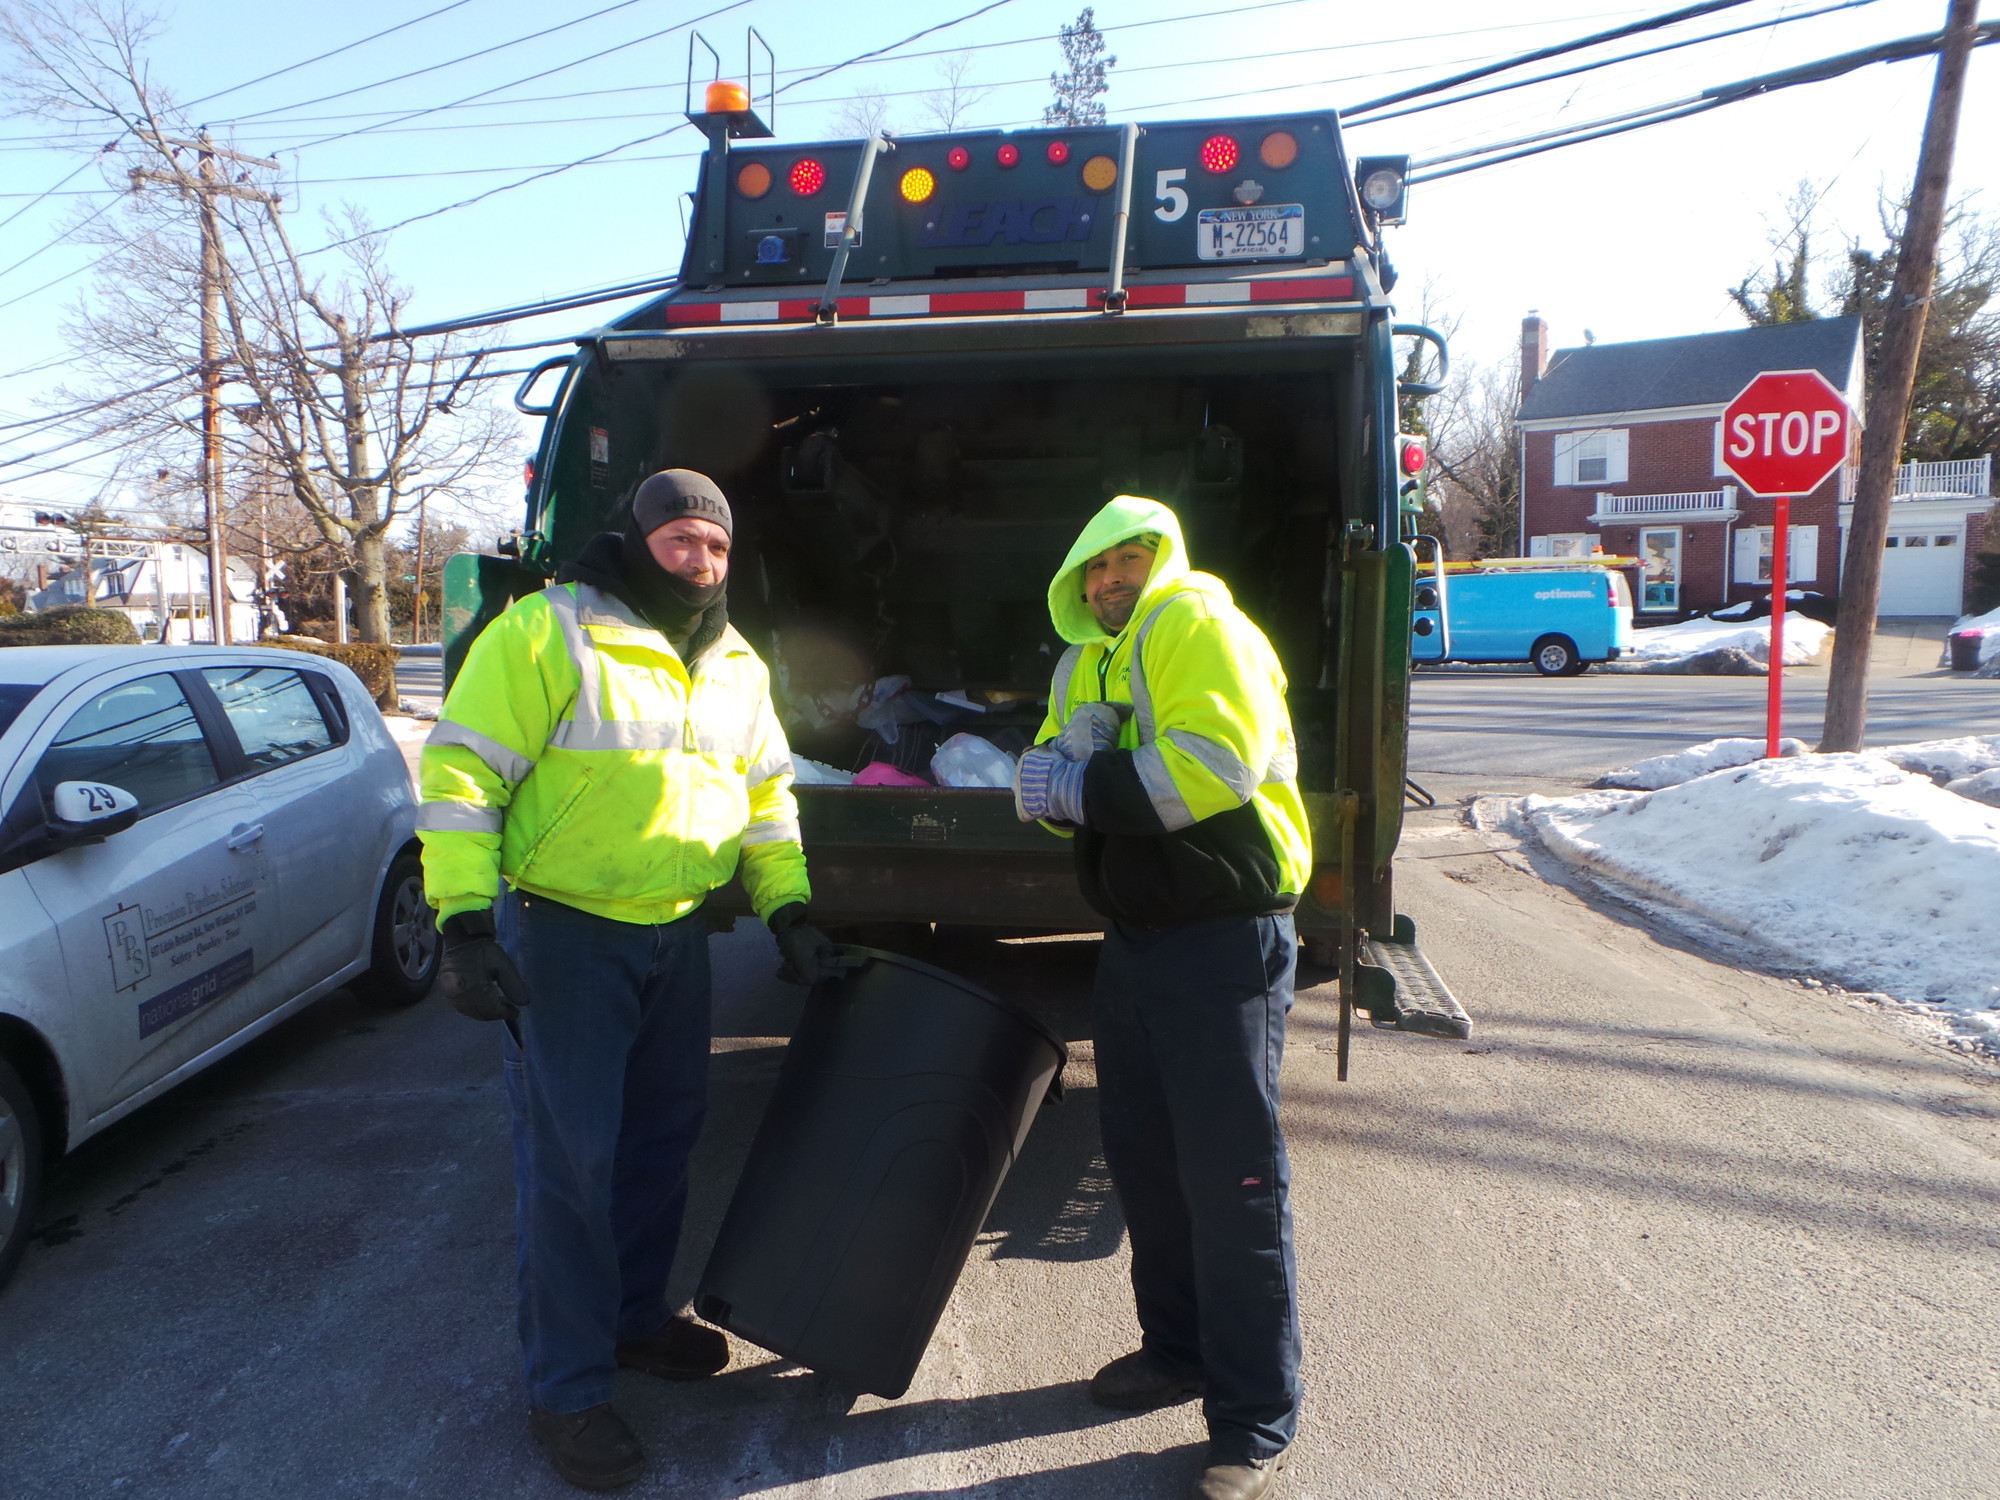 These two guys from the Department of Public Works were so cold they didn’t stop to give us their names, but they did continue to pick up the trash.